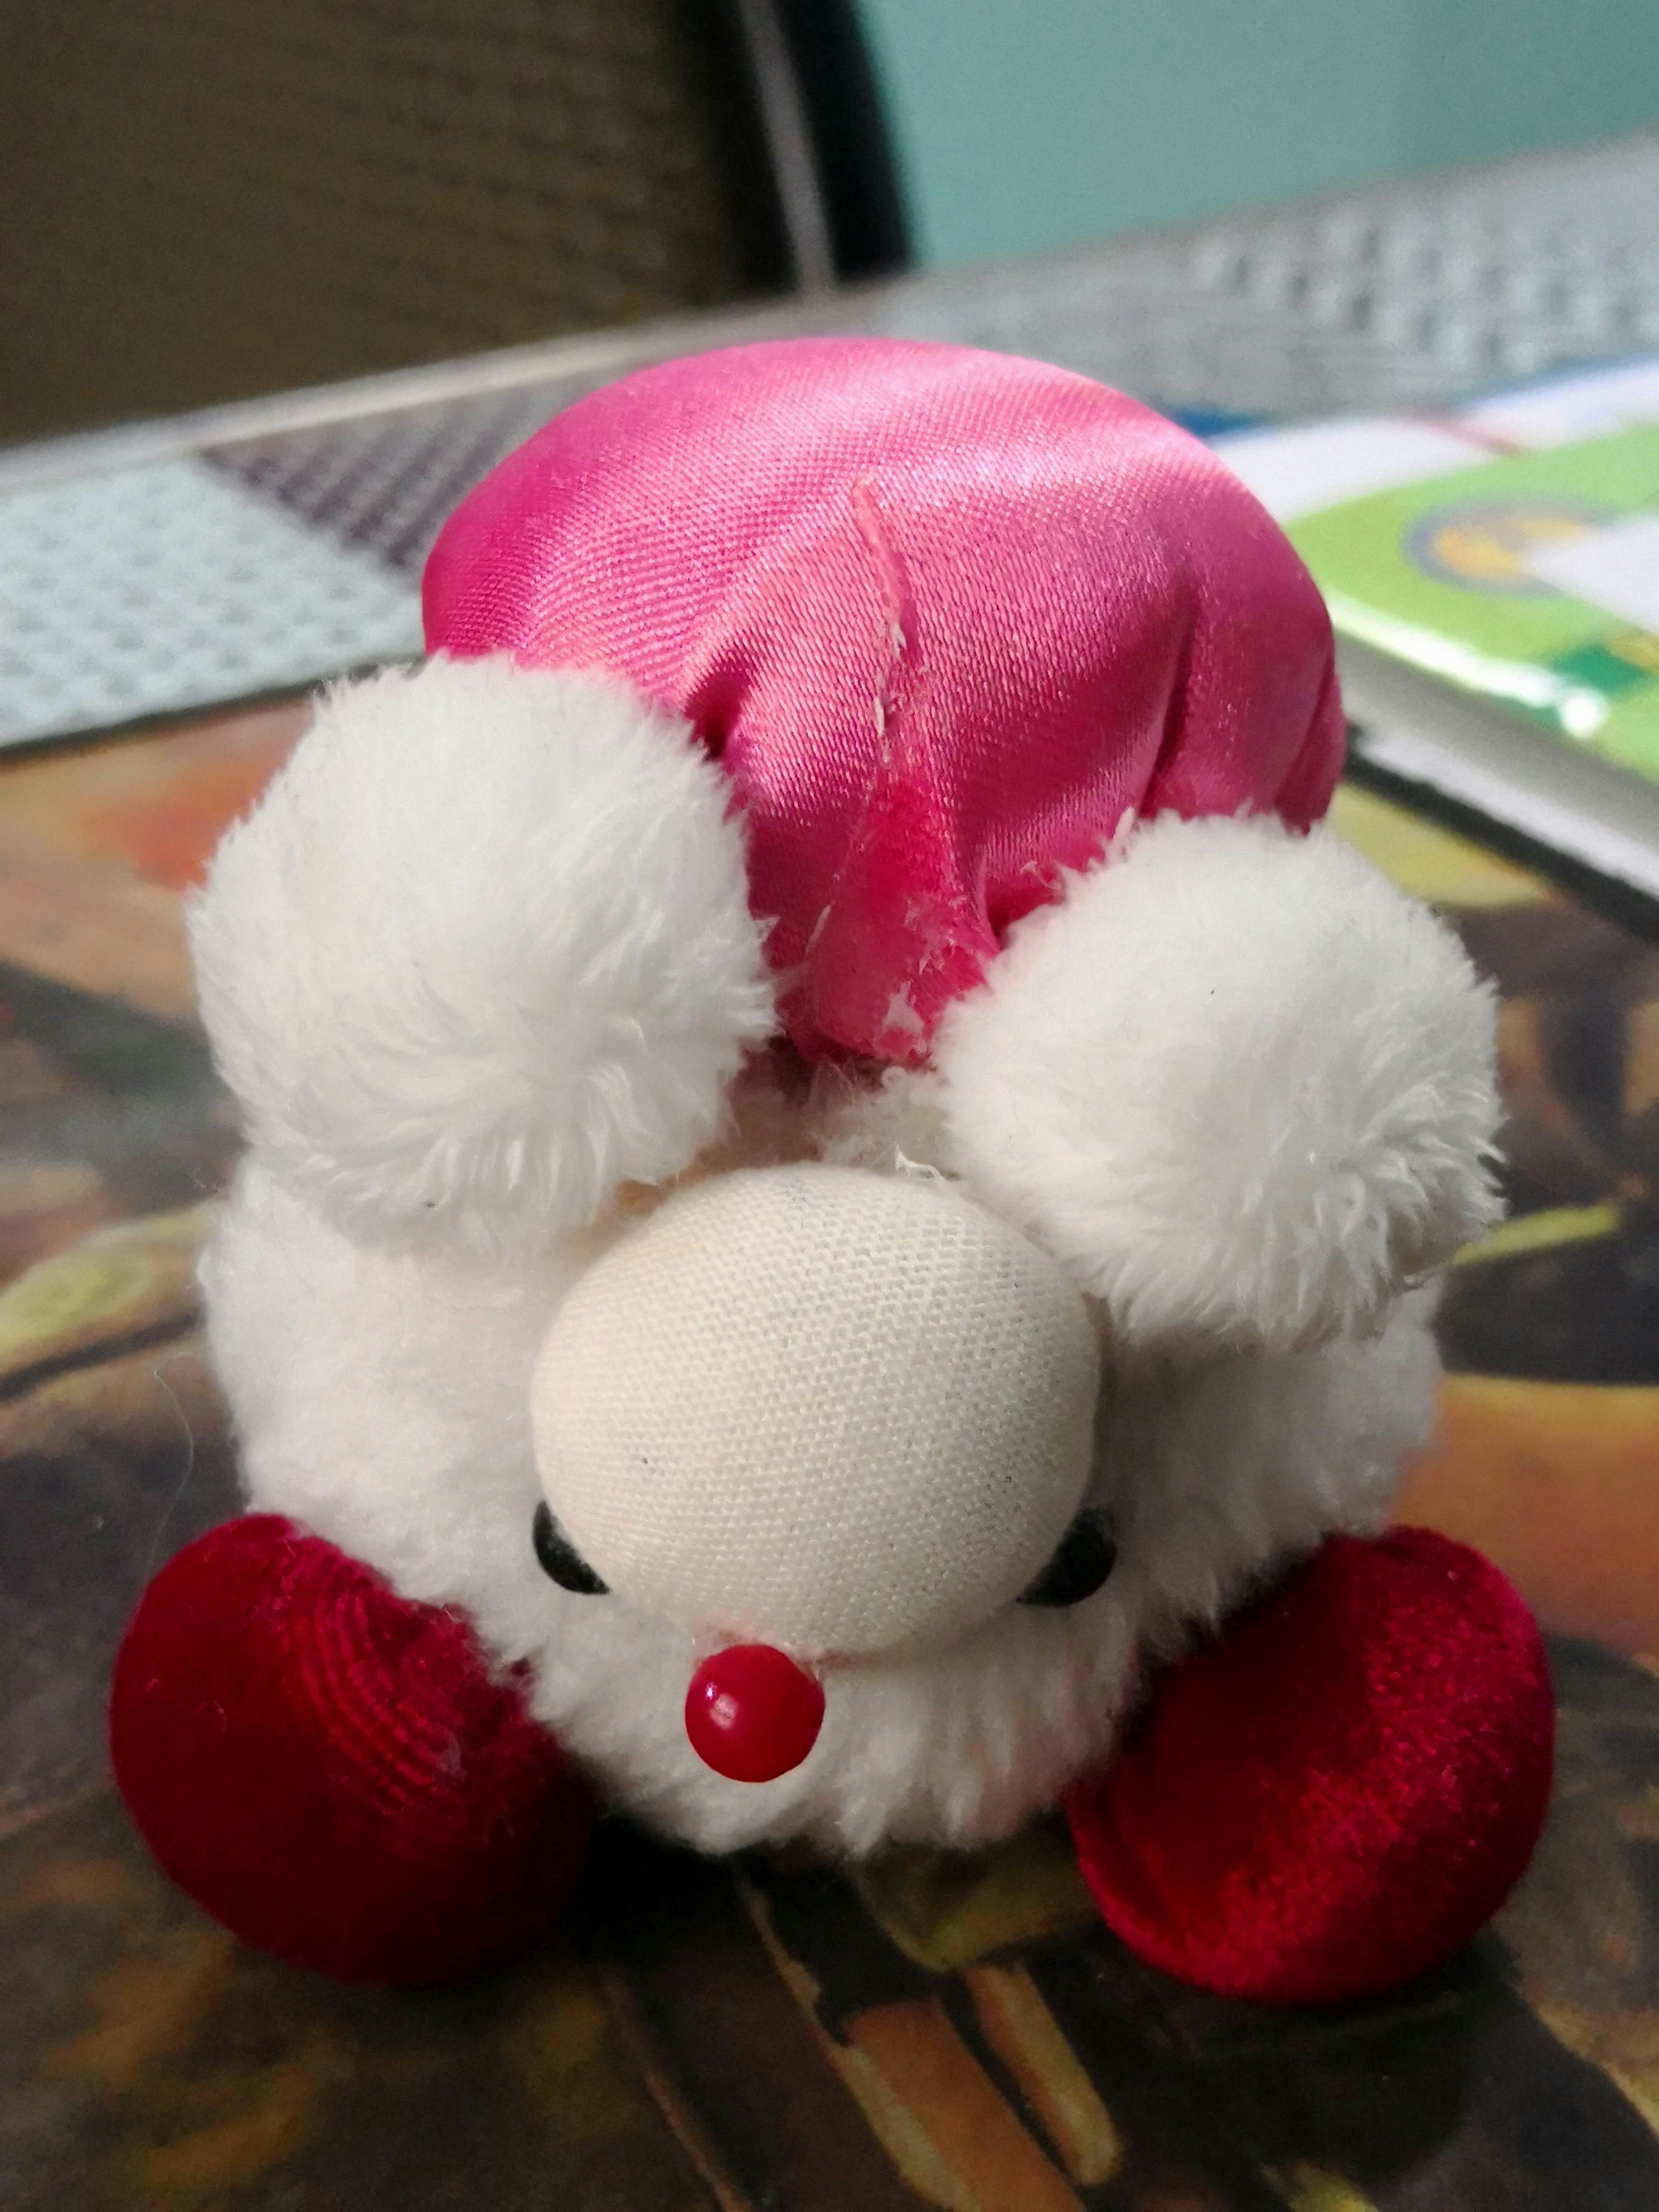 Free stock photo of stuff toy with red and white accent